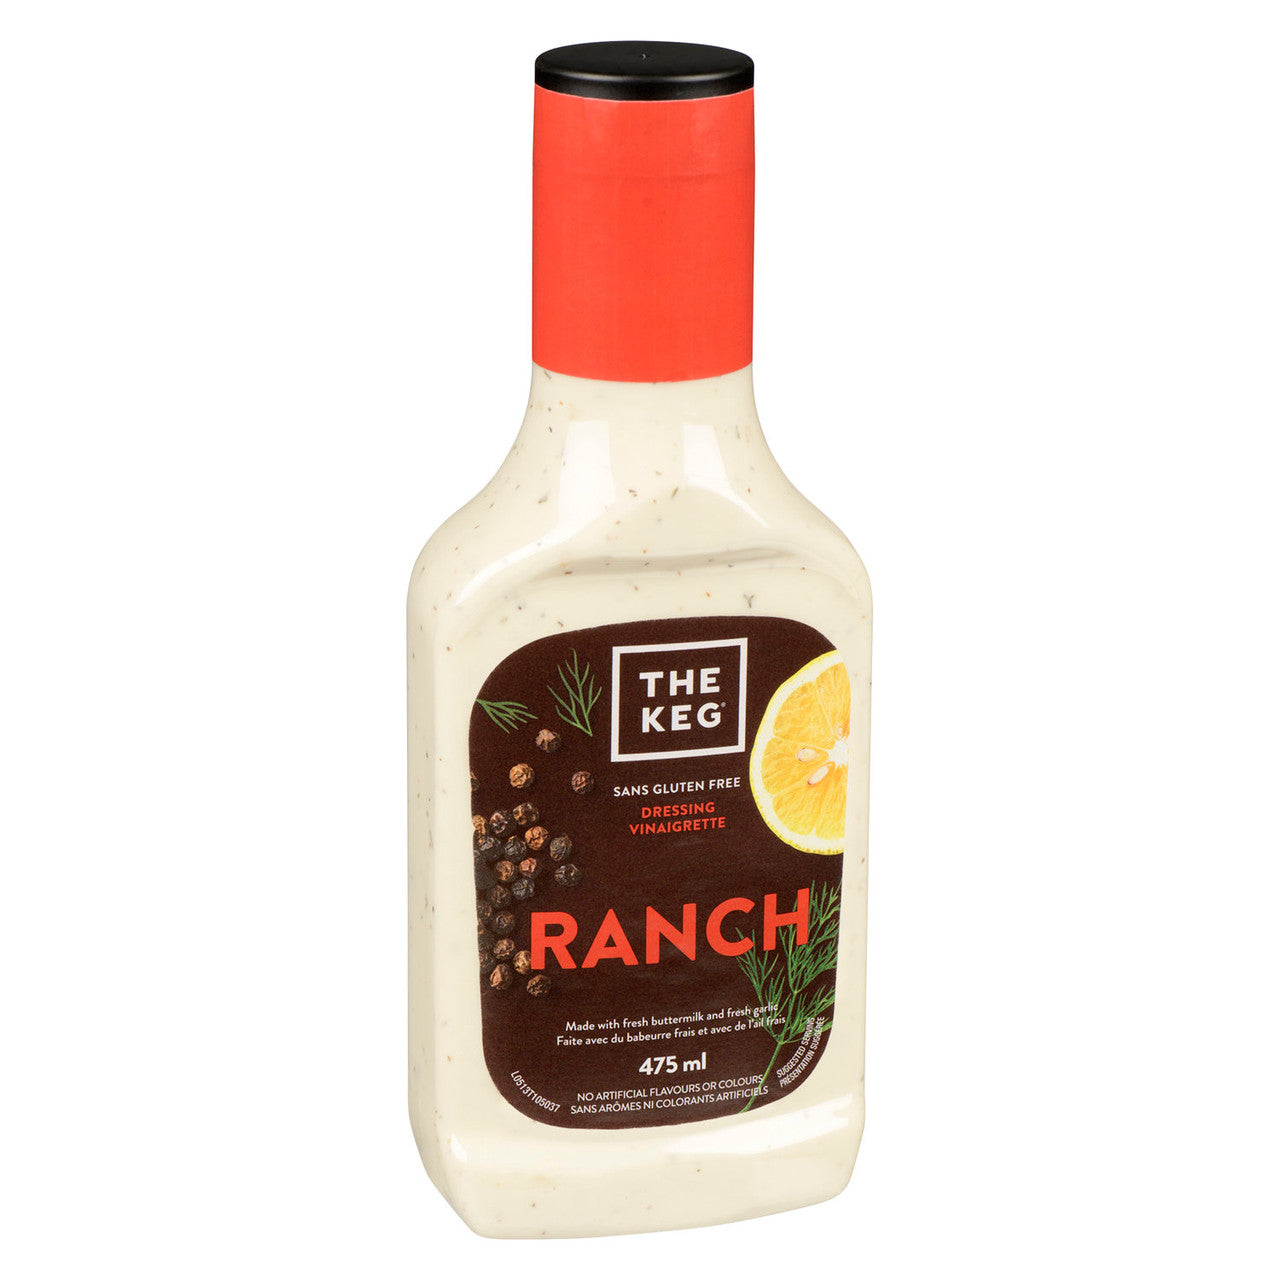 The Keg Steakhouse - Ranch Salad Dressing, 475ml/16oz., {Imported From Canada}